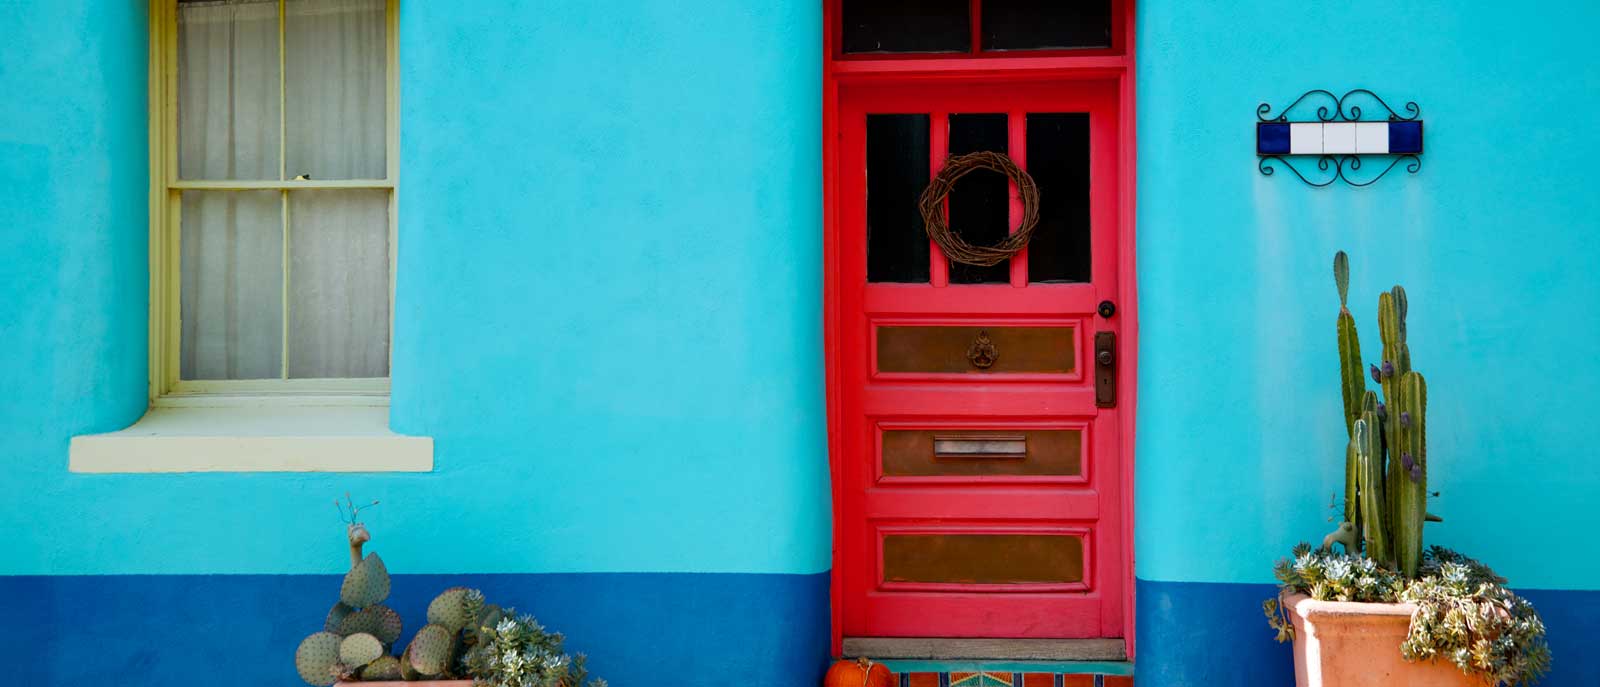 Warm blue wall color with red door